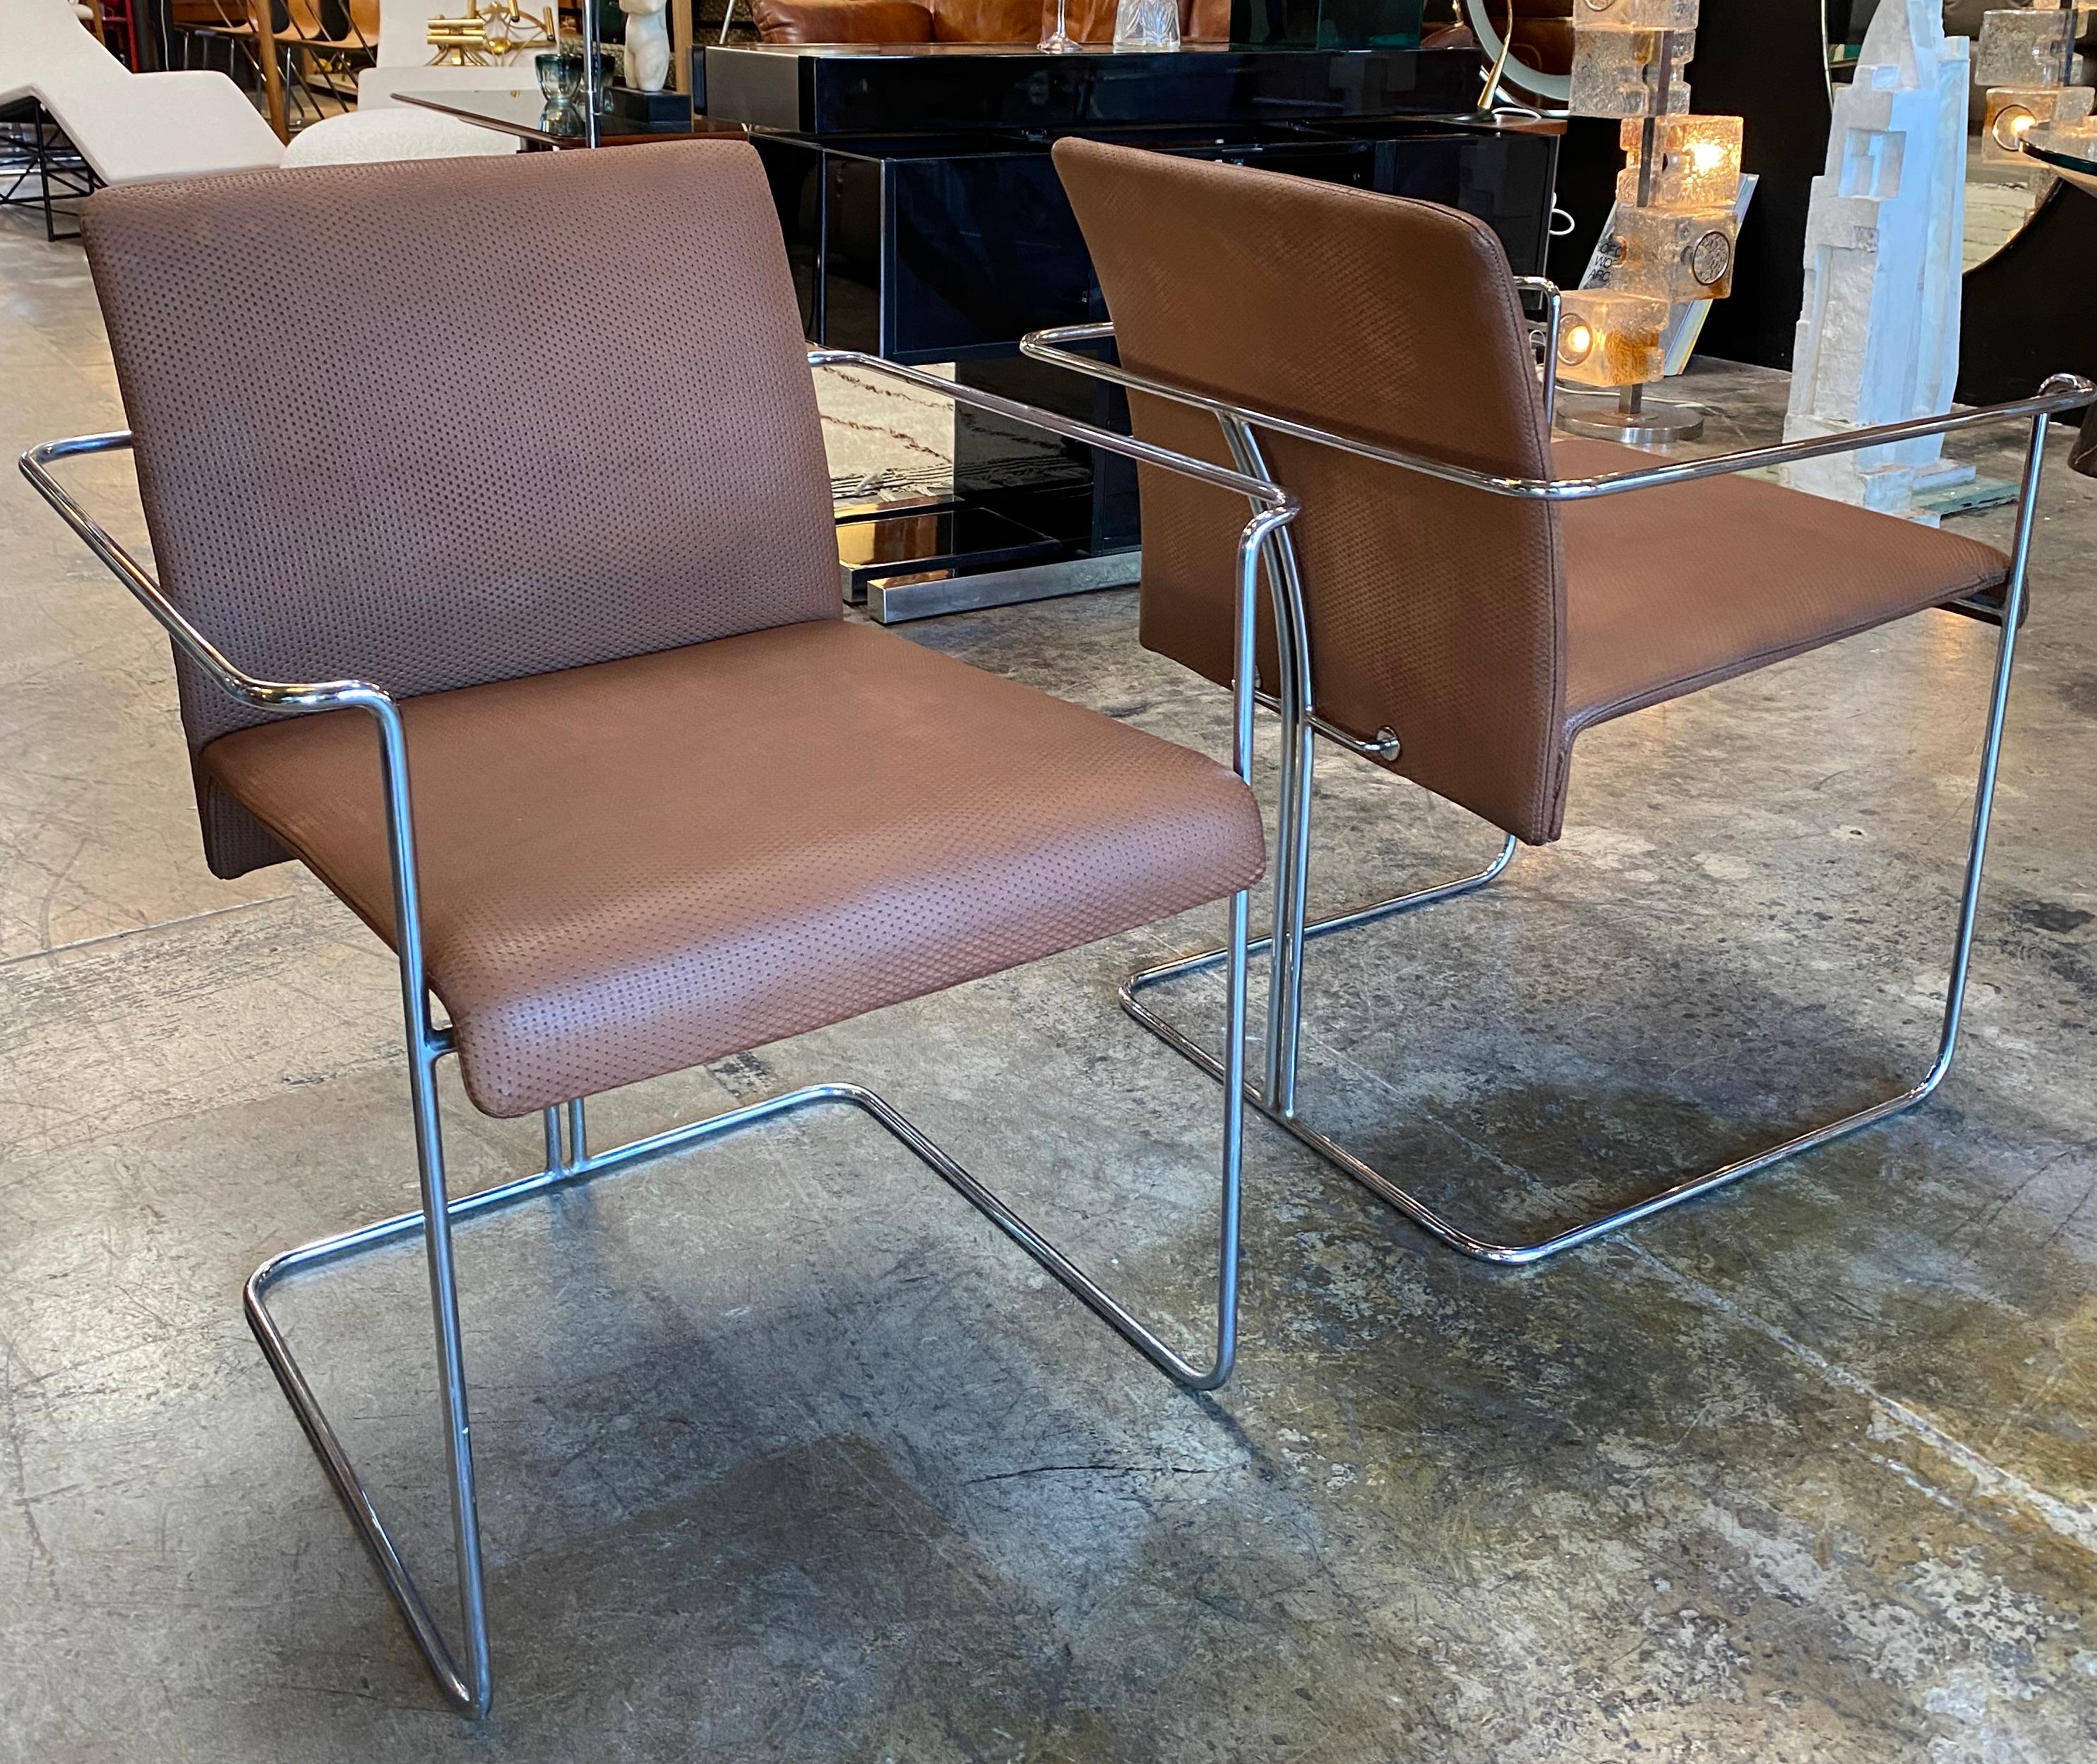 Italian Set of 4 Dining Chairs Leather and Chrome by F.ll Saporiti, 1970s For Sale